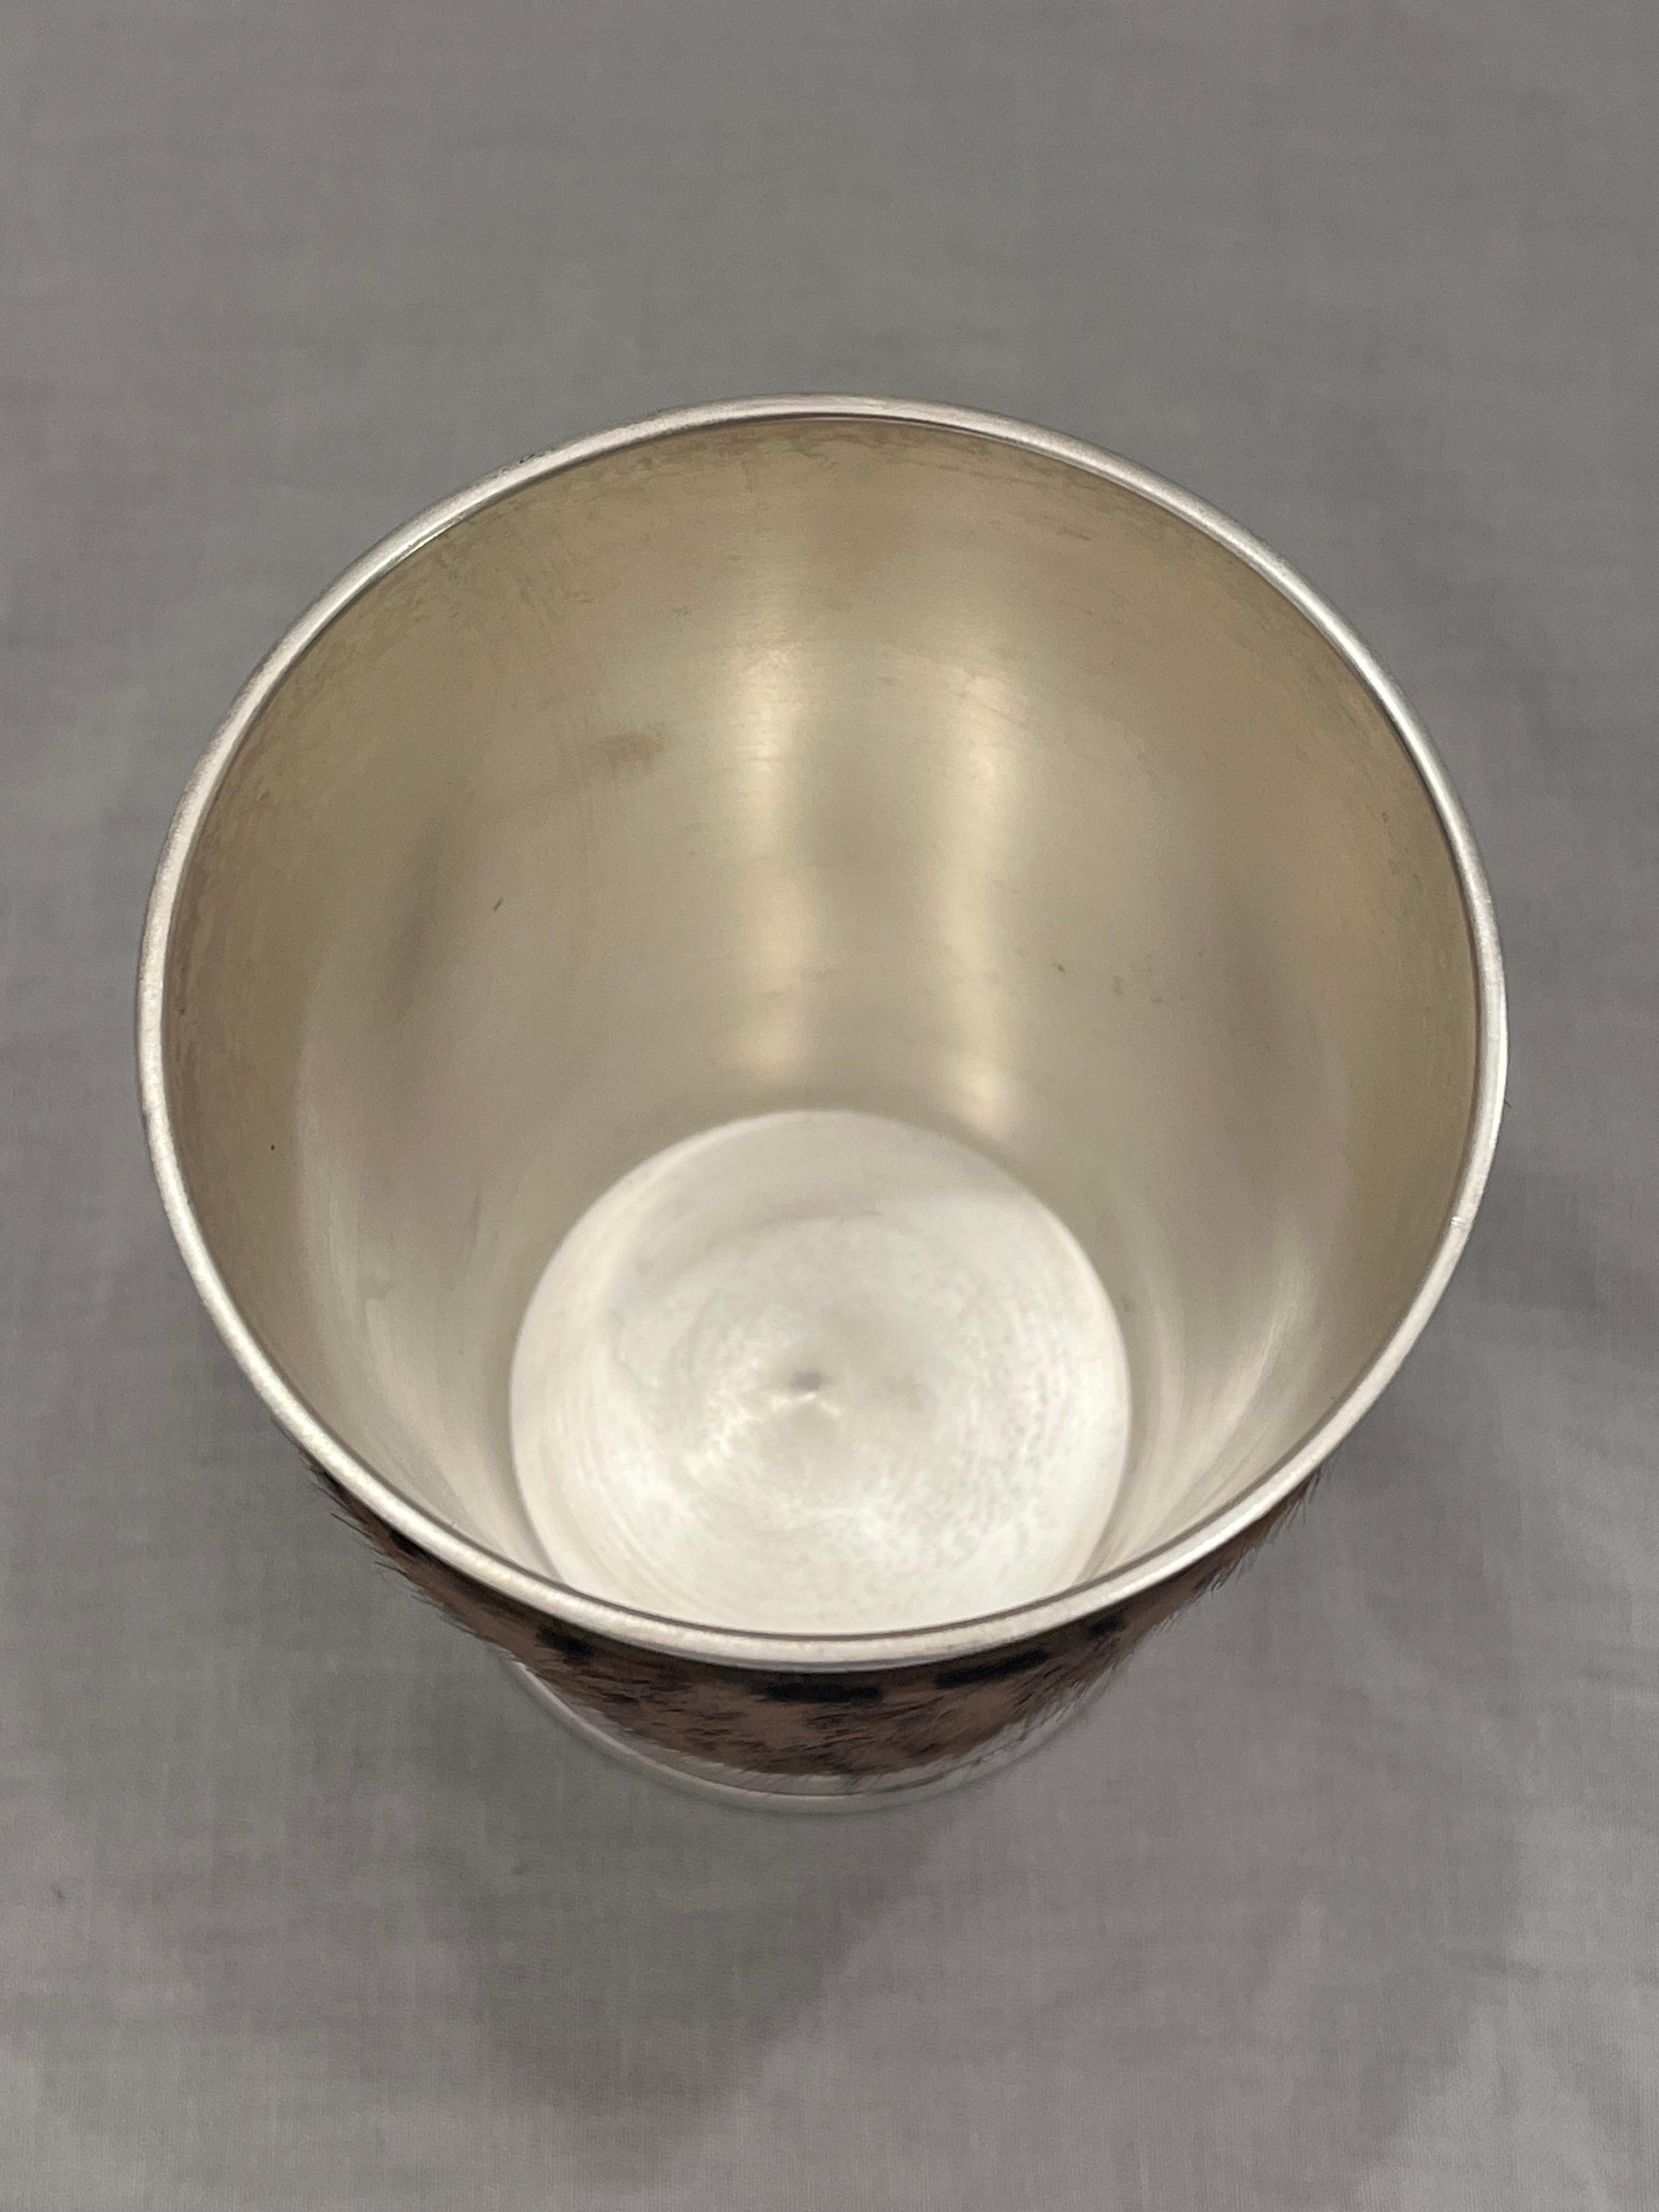 Dominic Chambon Paris Silvered Metal and Faux Fur Leather Covered Beaker or Cup In Good Condition For Sale In Atlanta, GA